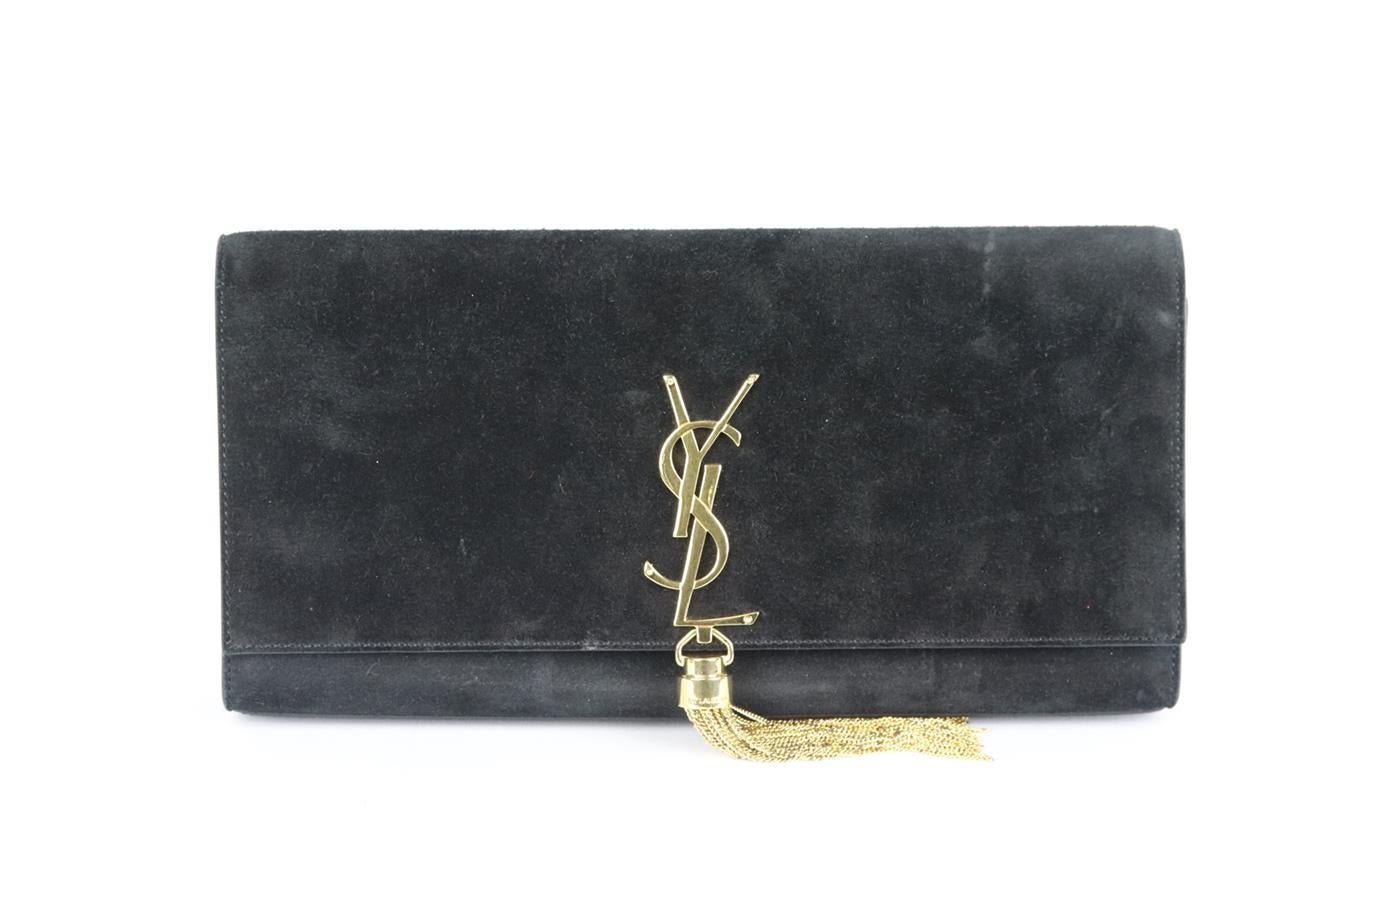 Saint Laurent Kate Monogramme suede clutch. Made from black suede with large gold-tone YSL plaque and tassel on the front, it has a large internal compartment with card slot. Black. Magnetic snap fastening at front. Does not come with box or